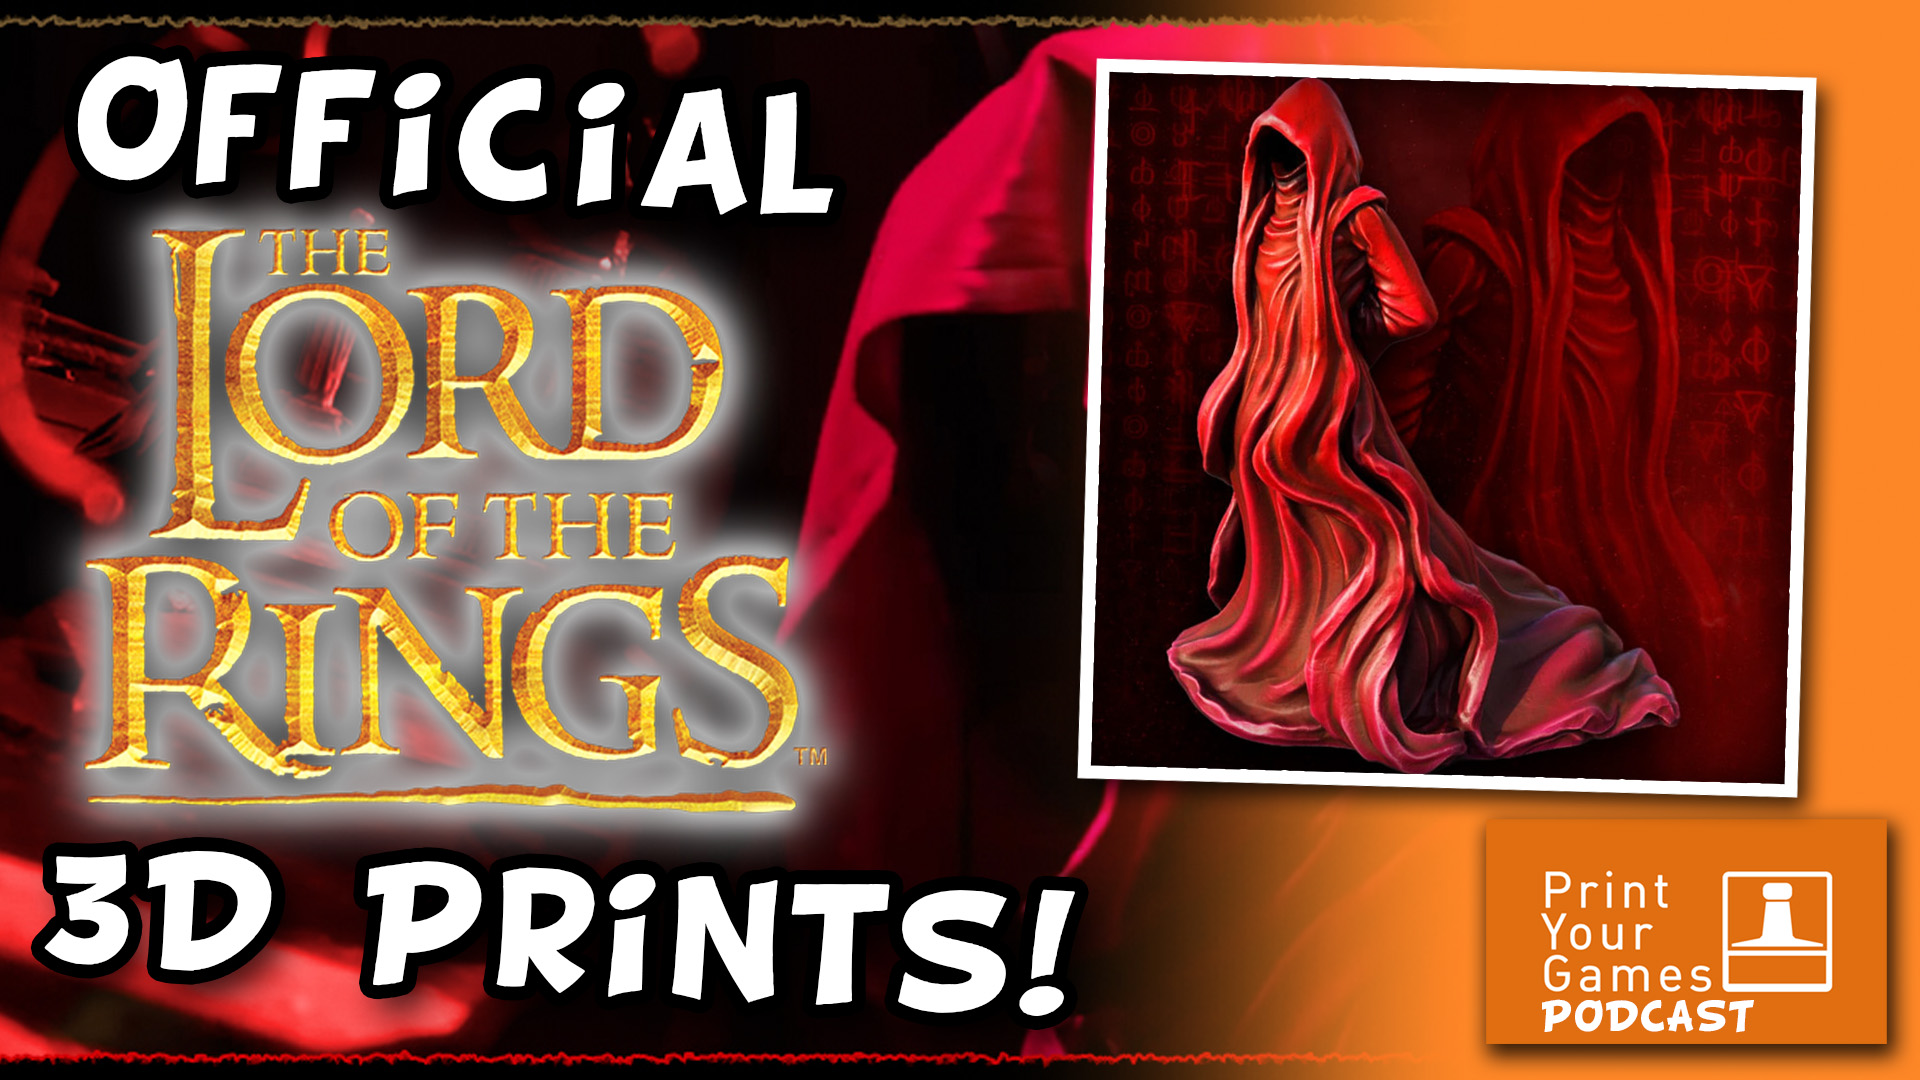 Official Lord of the Rings 3D Prints!